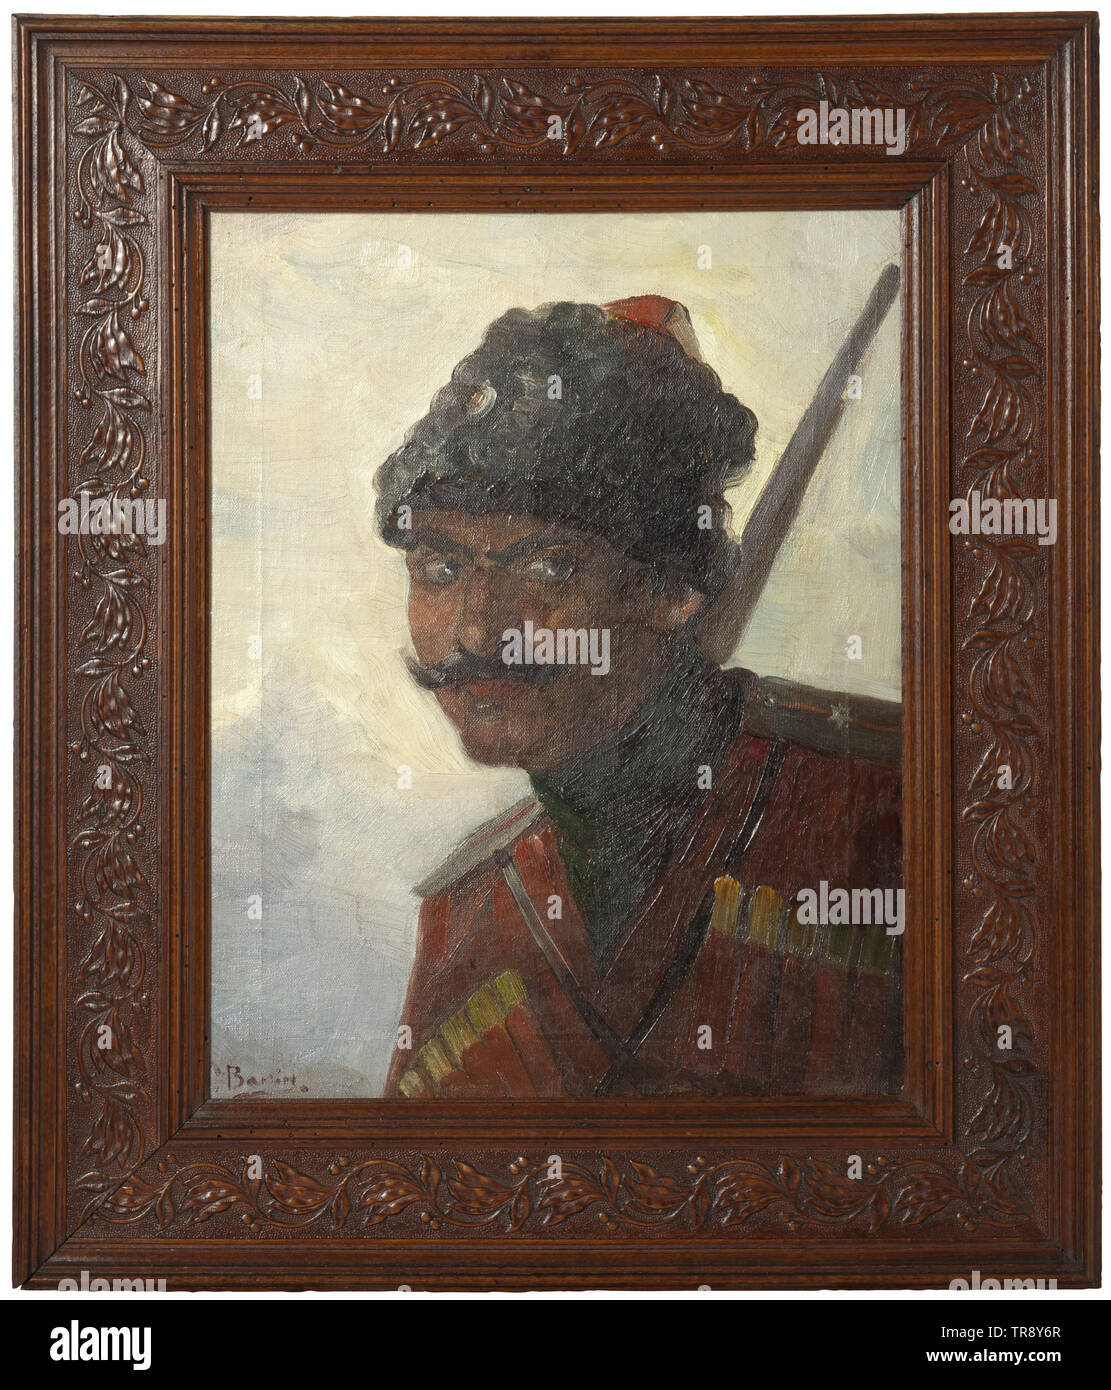 A portrait of a Cossack officer, Russia, circa 1910 Oil on canvas. Picture of a Cossack in uniform with epaulettes and gaziri, a rifle on his back, in the background a mountain landscape. Signed in Cyrillic on the lower left 'Vakin'. Dimensions 44 x 35 cm. In original, carved wooden frame. Dimensions of frame 59 x 50 cm. historic, historical, 20th century, Additional-Rights-Clearance-Info-Not-Available Stock Photo